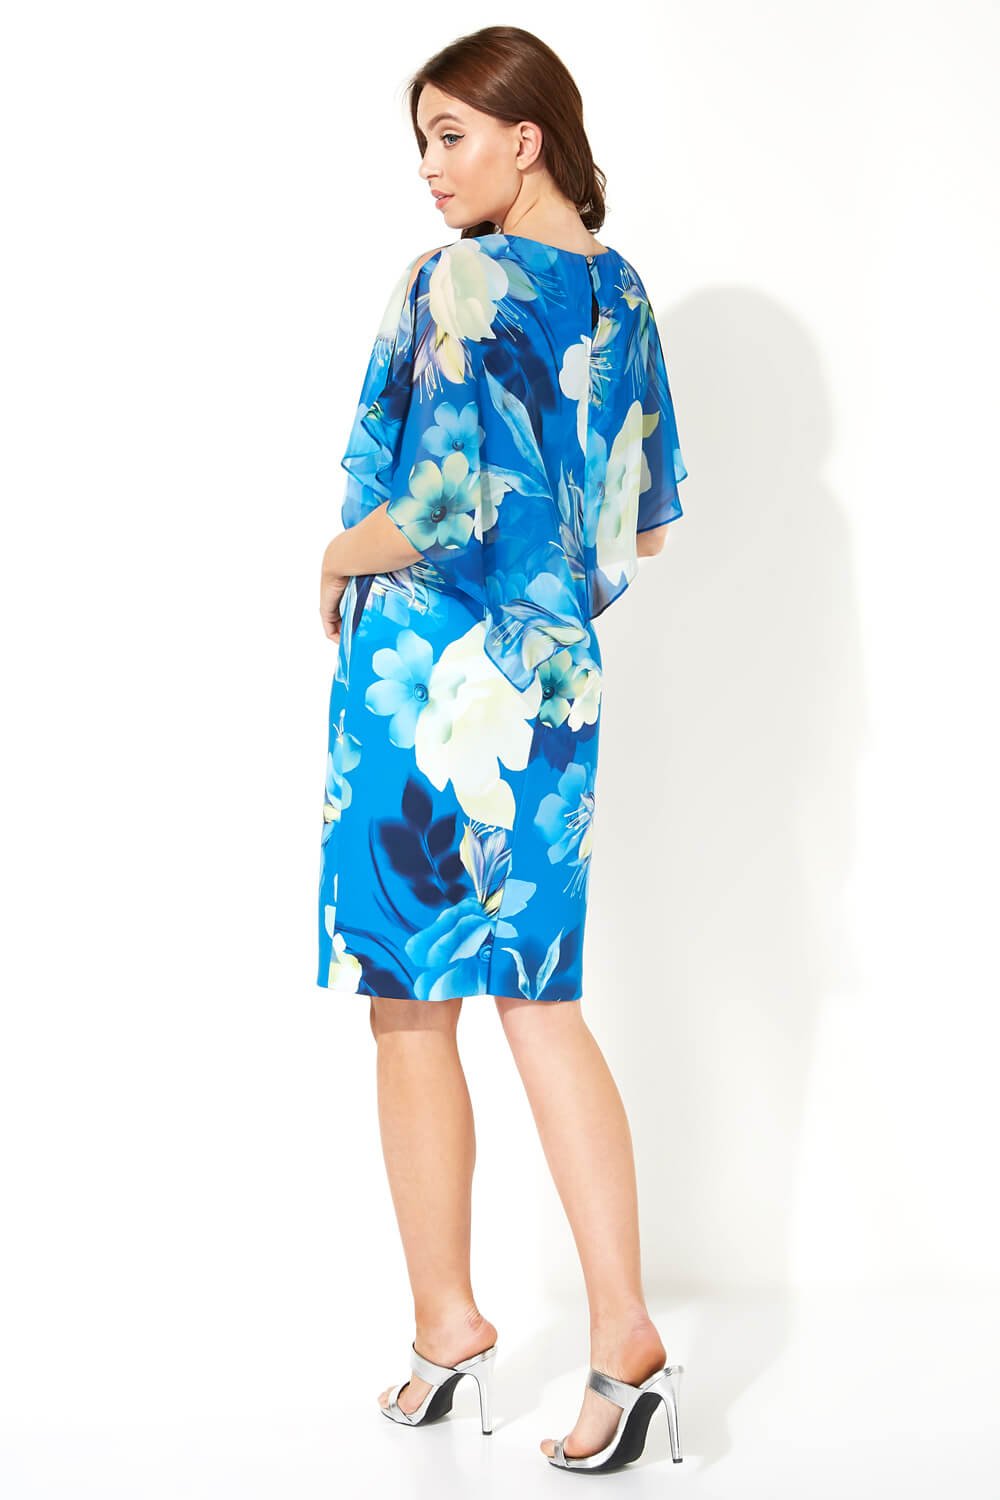 Blue Floral Overlay Chiffon Dress, Image 2 of 4